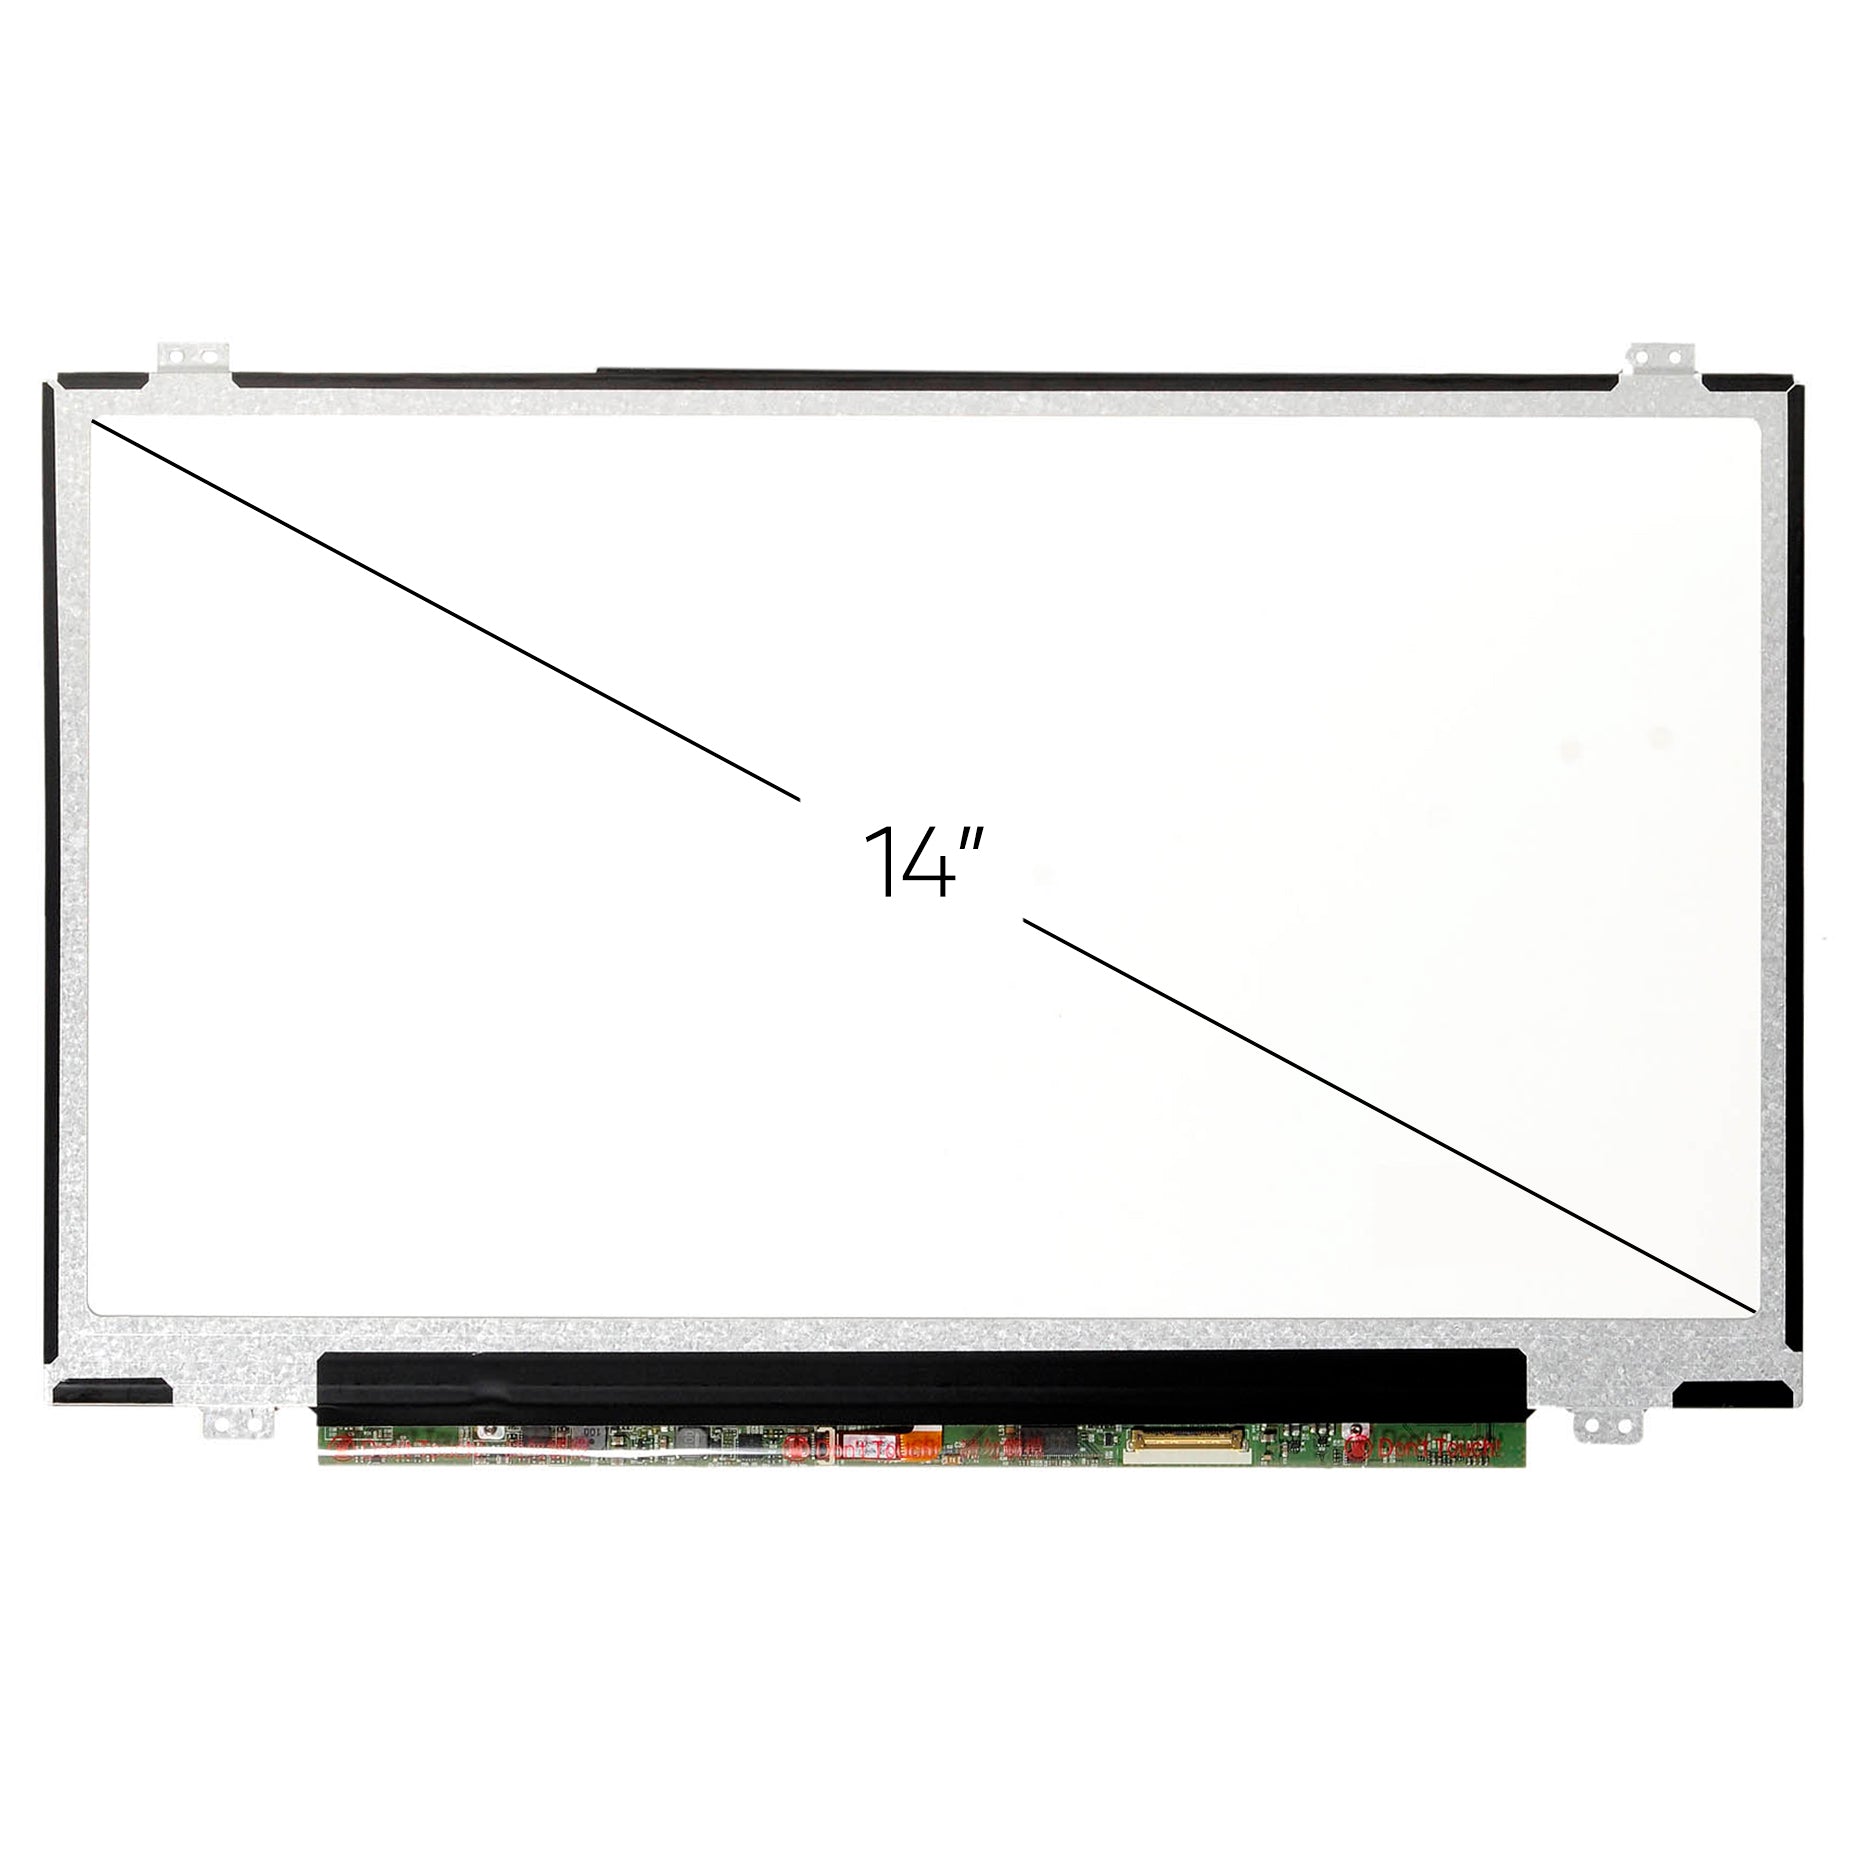 Screen Replacement for Dell P/N 06HY1W DP/N 6HY1W FHD 1920x1080 IPS Matte LCD LED Display